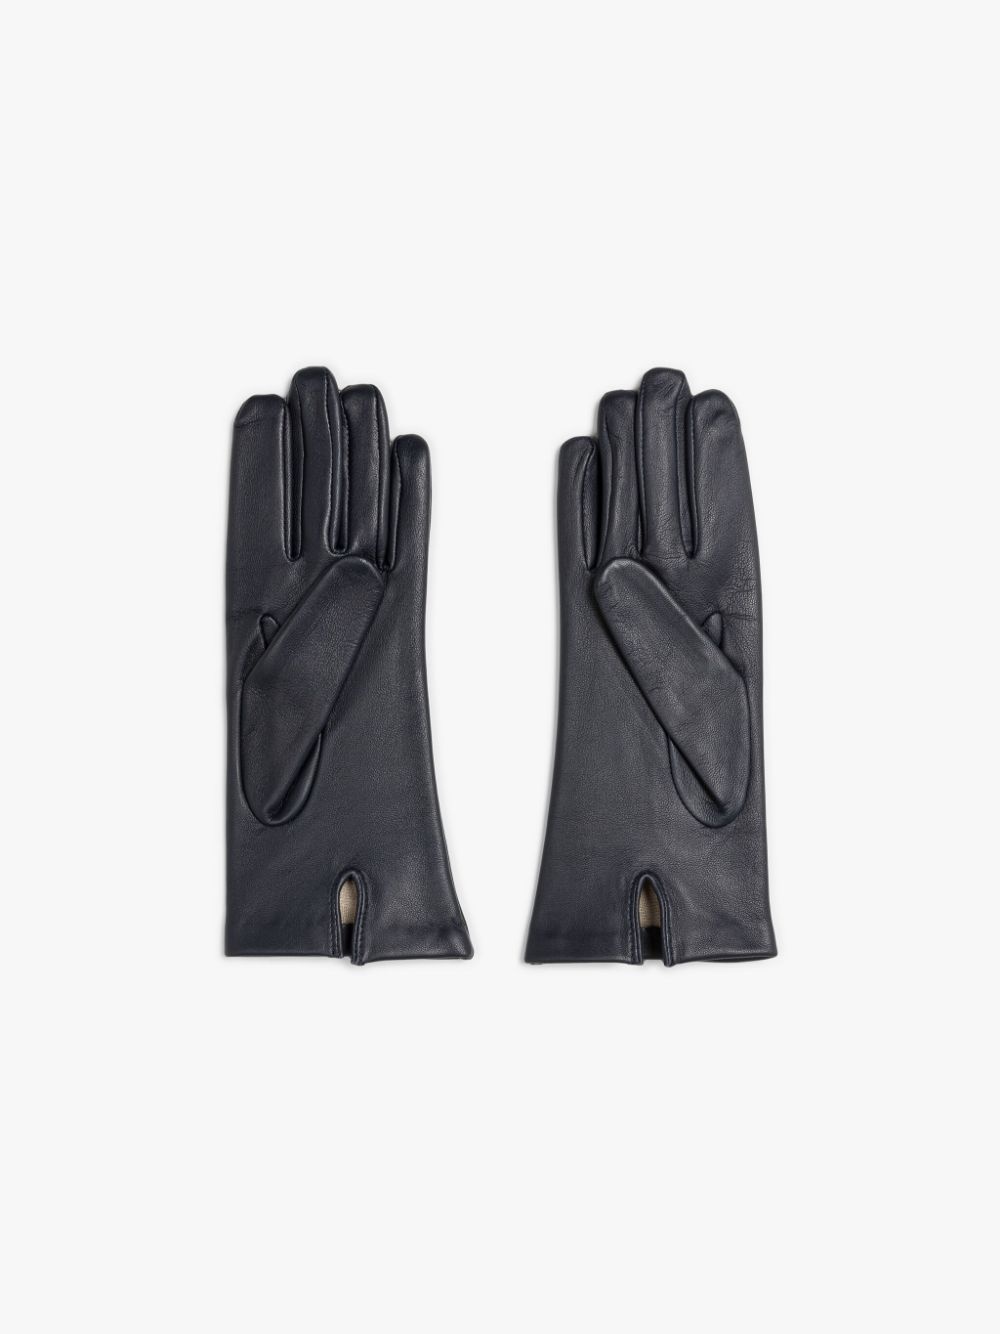 NAVY LEATHER GLOVES - 3